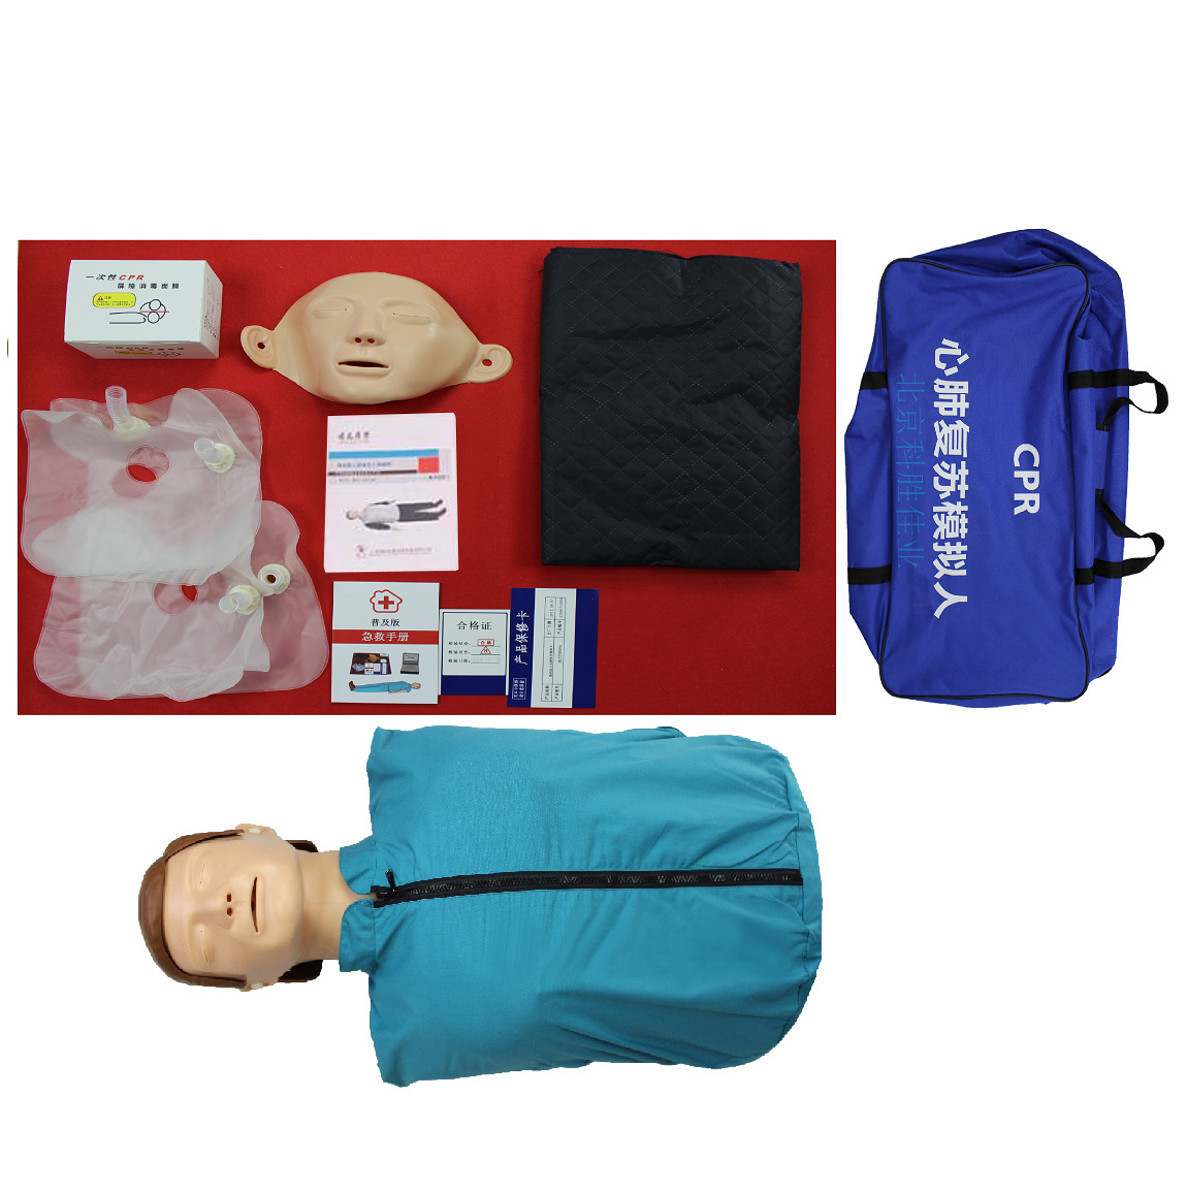 CPR Adult Manikin AED First Aid Training Dummy Training Medical Model Respiration Human 14